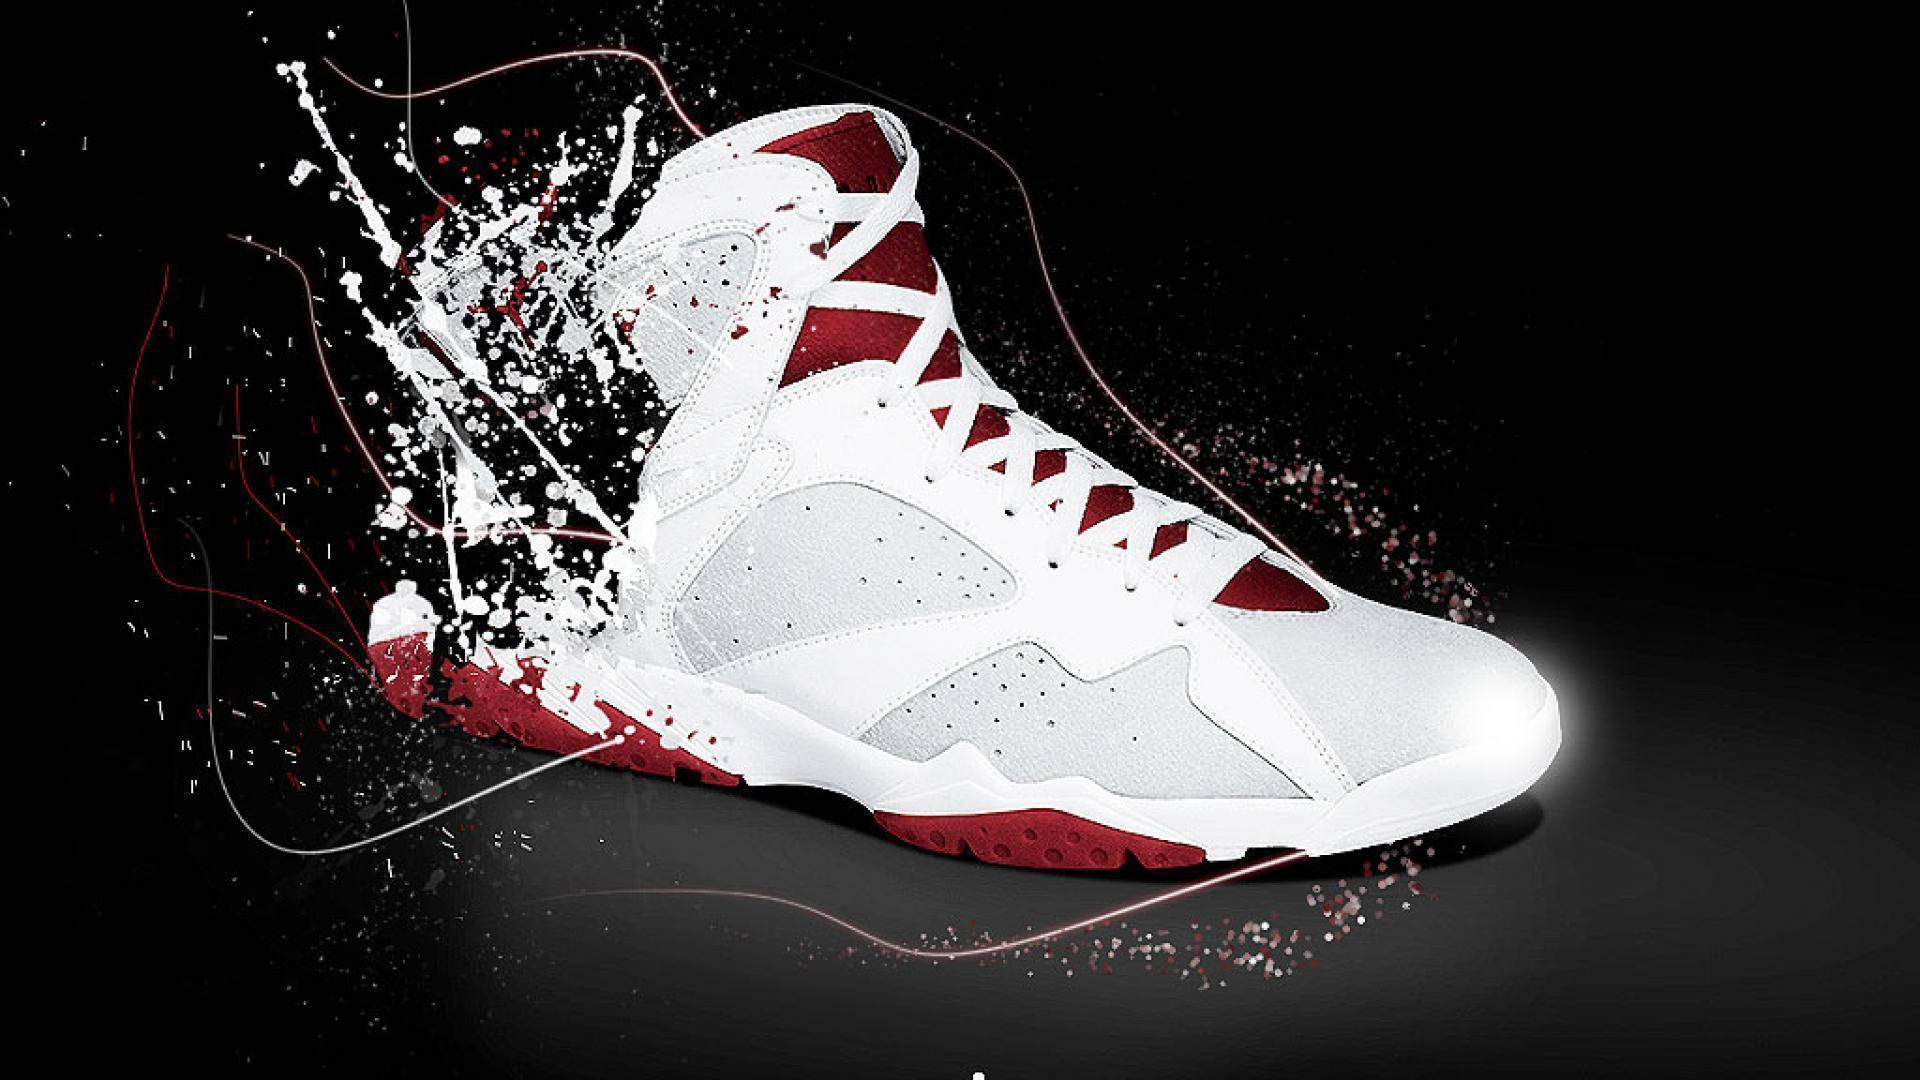 Caption: Classic Red And White Jordan 7 Basketball Shoes Background